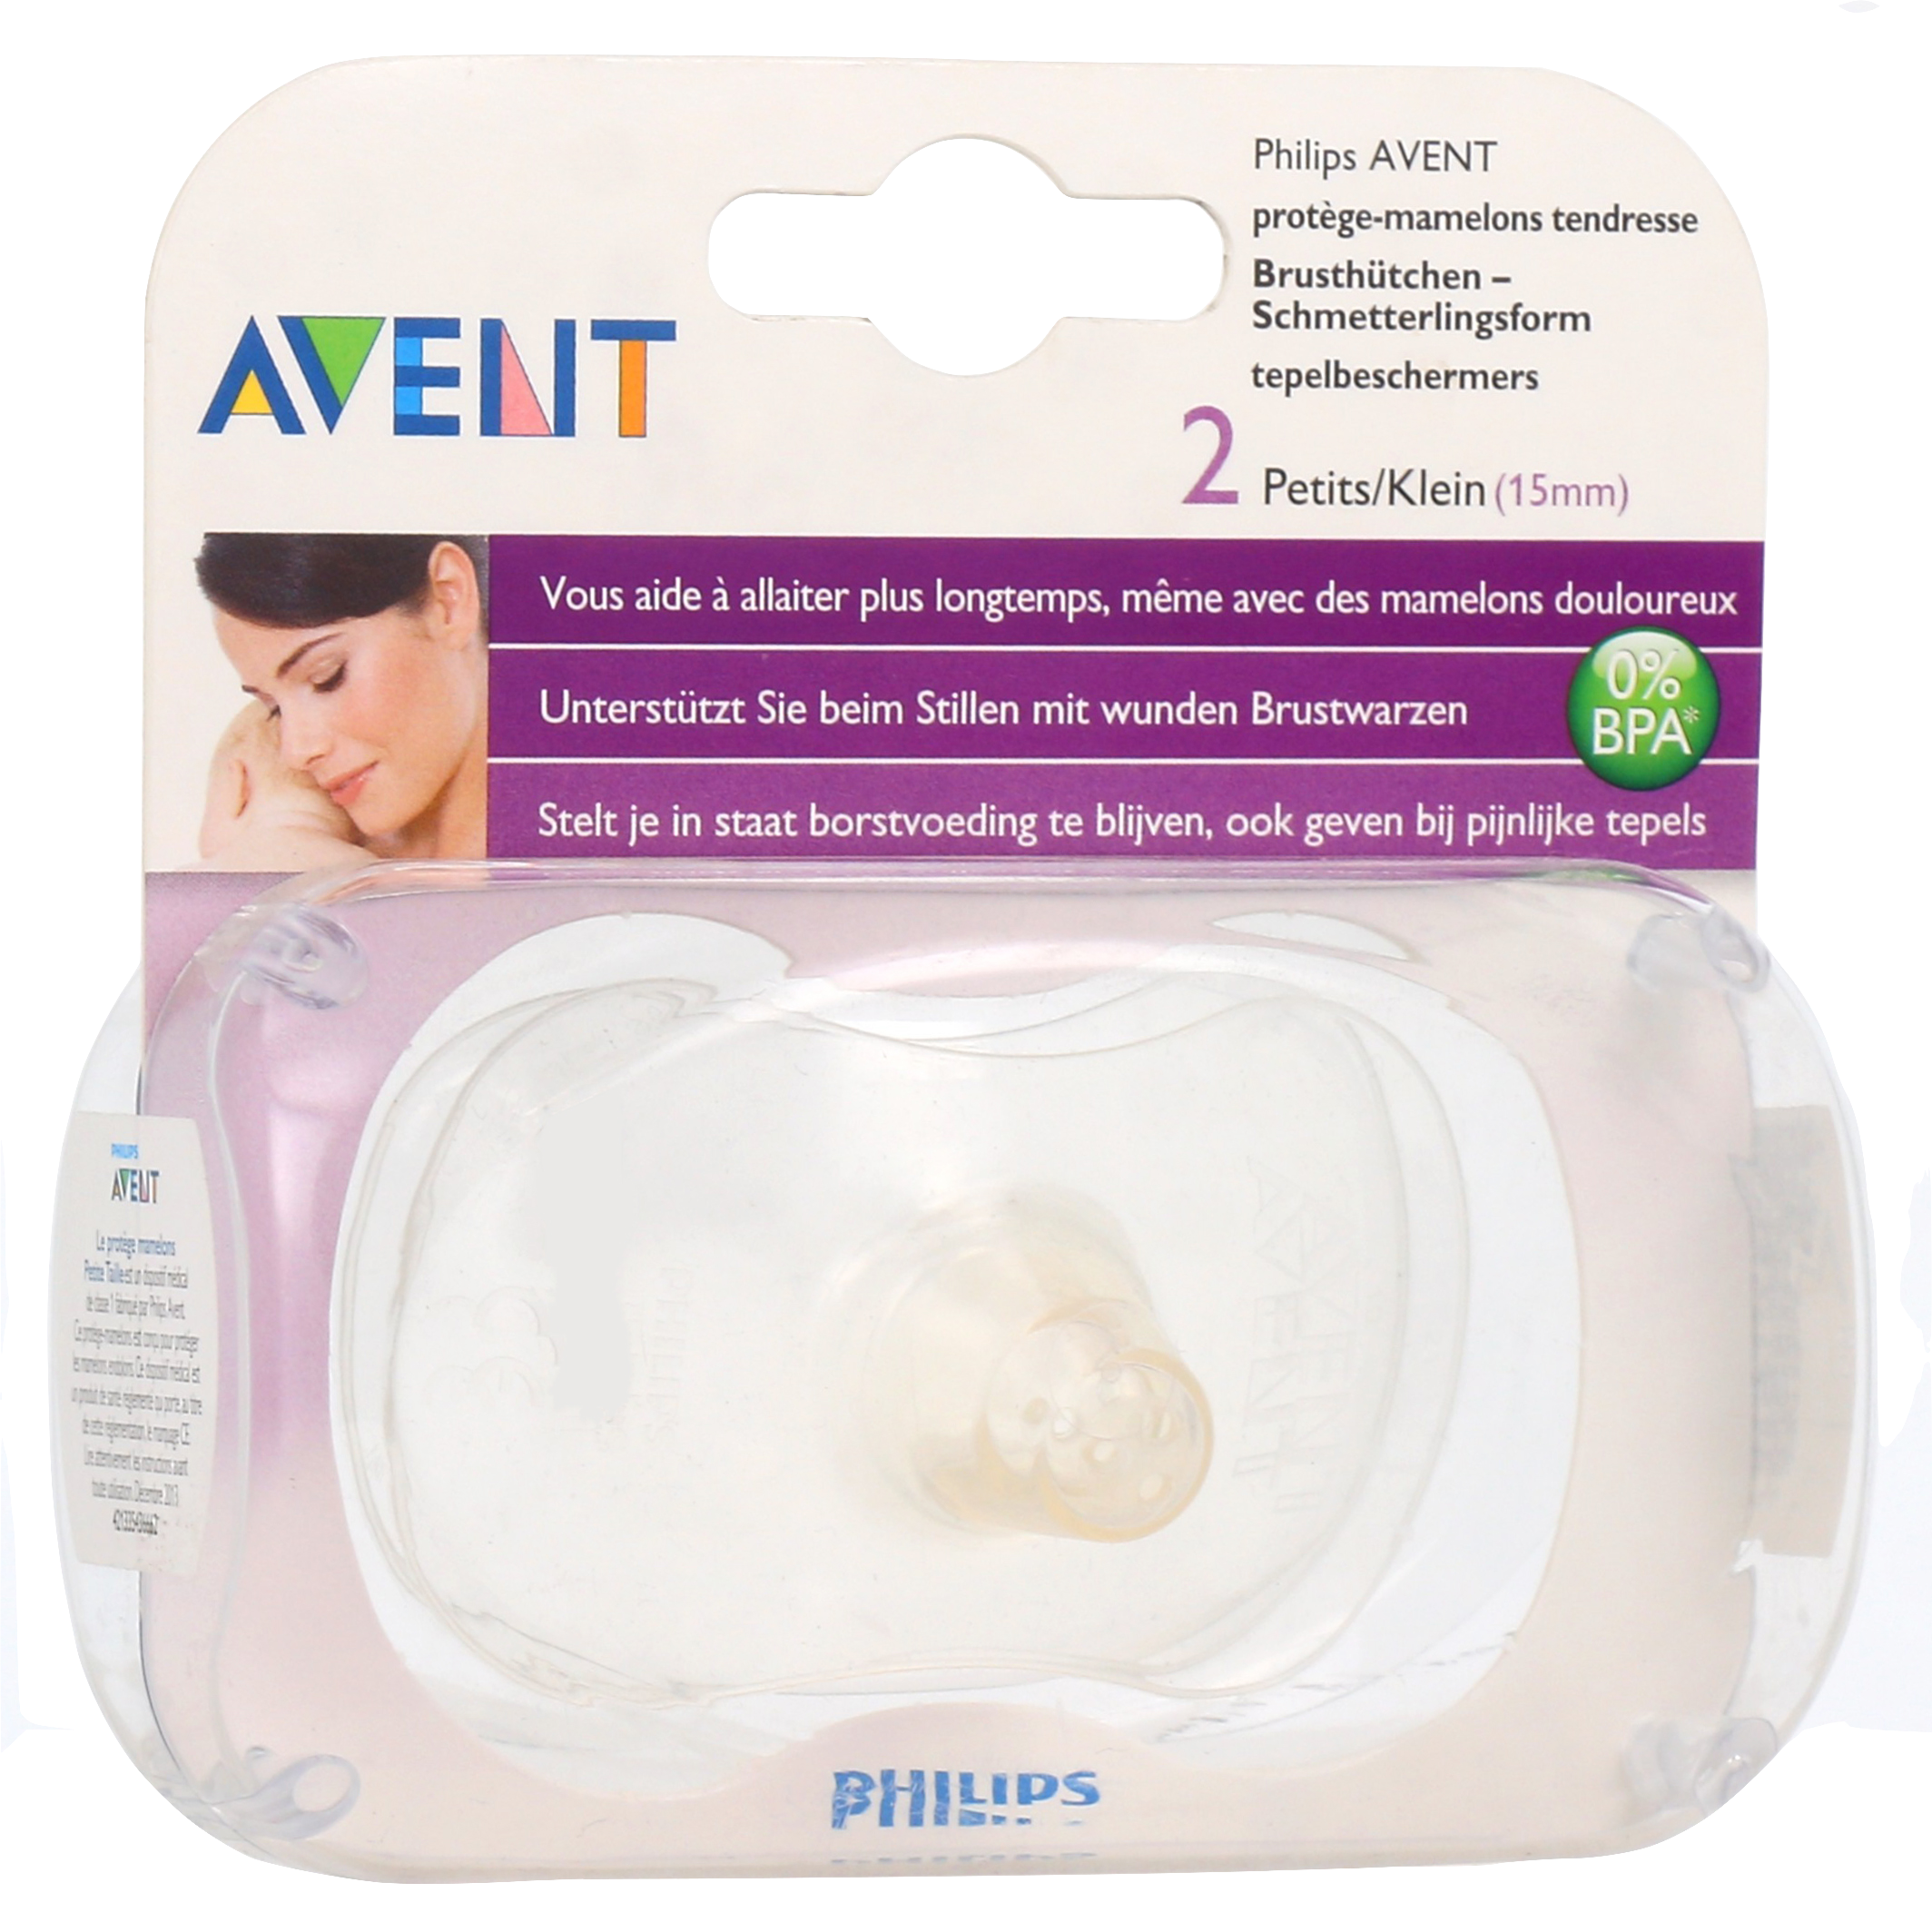 https://cdn.pharmaciedesdrakkars.com/media/images/products/philips-avent-protege-mamelons-philips-avent7-1679569116.jpg